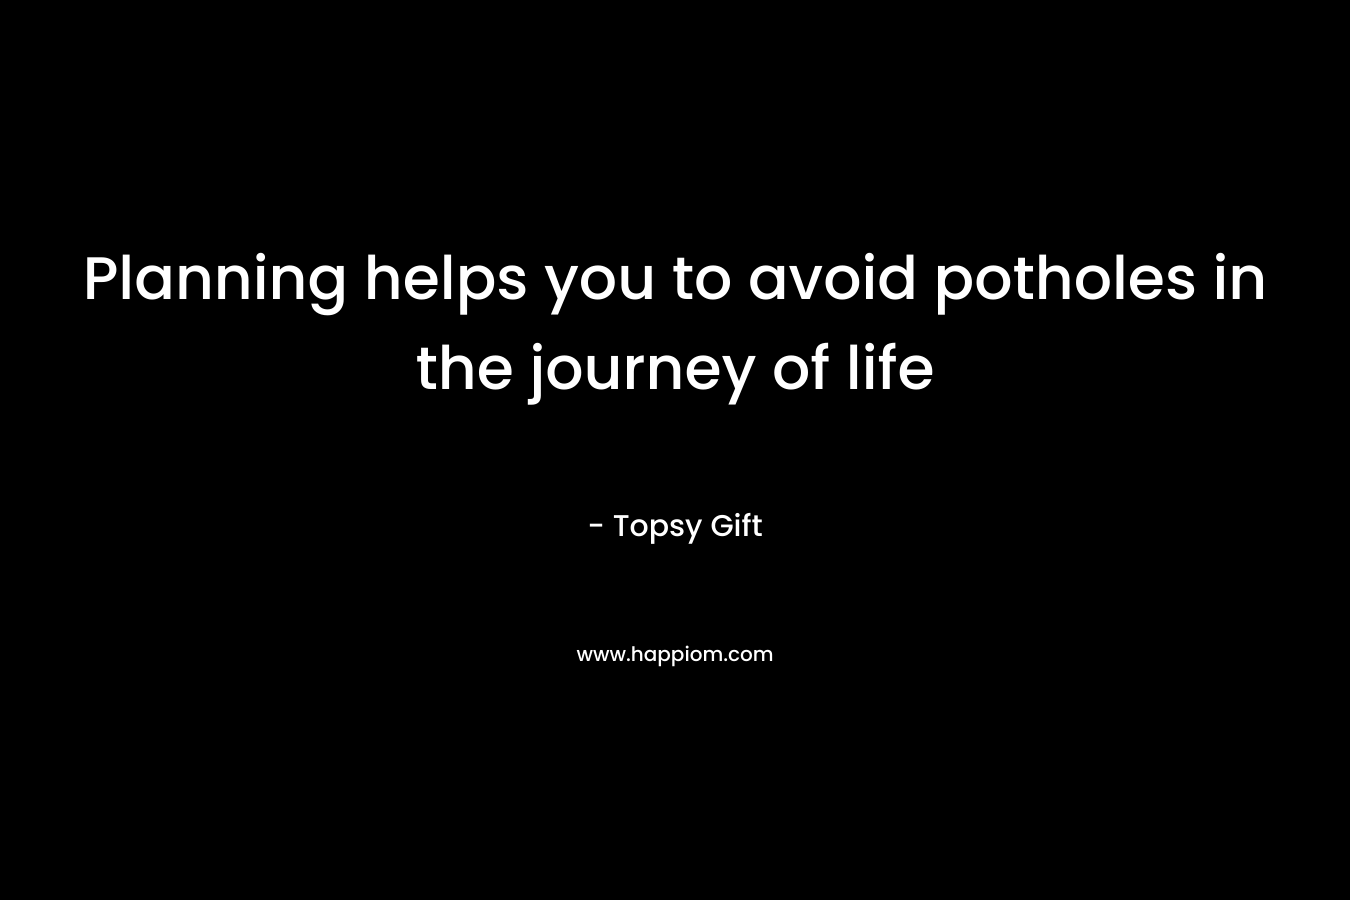 Planning helps you to avoid potholes in the journey of life